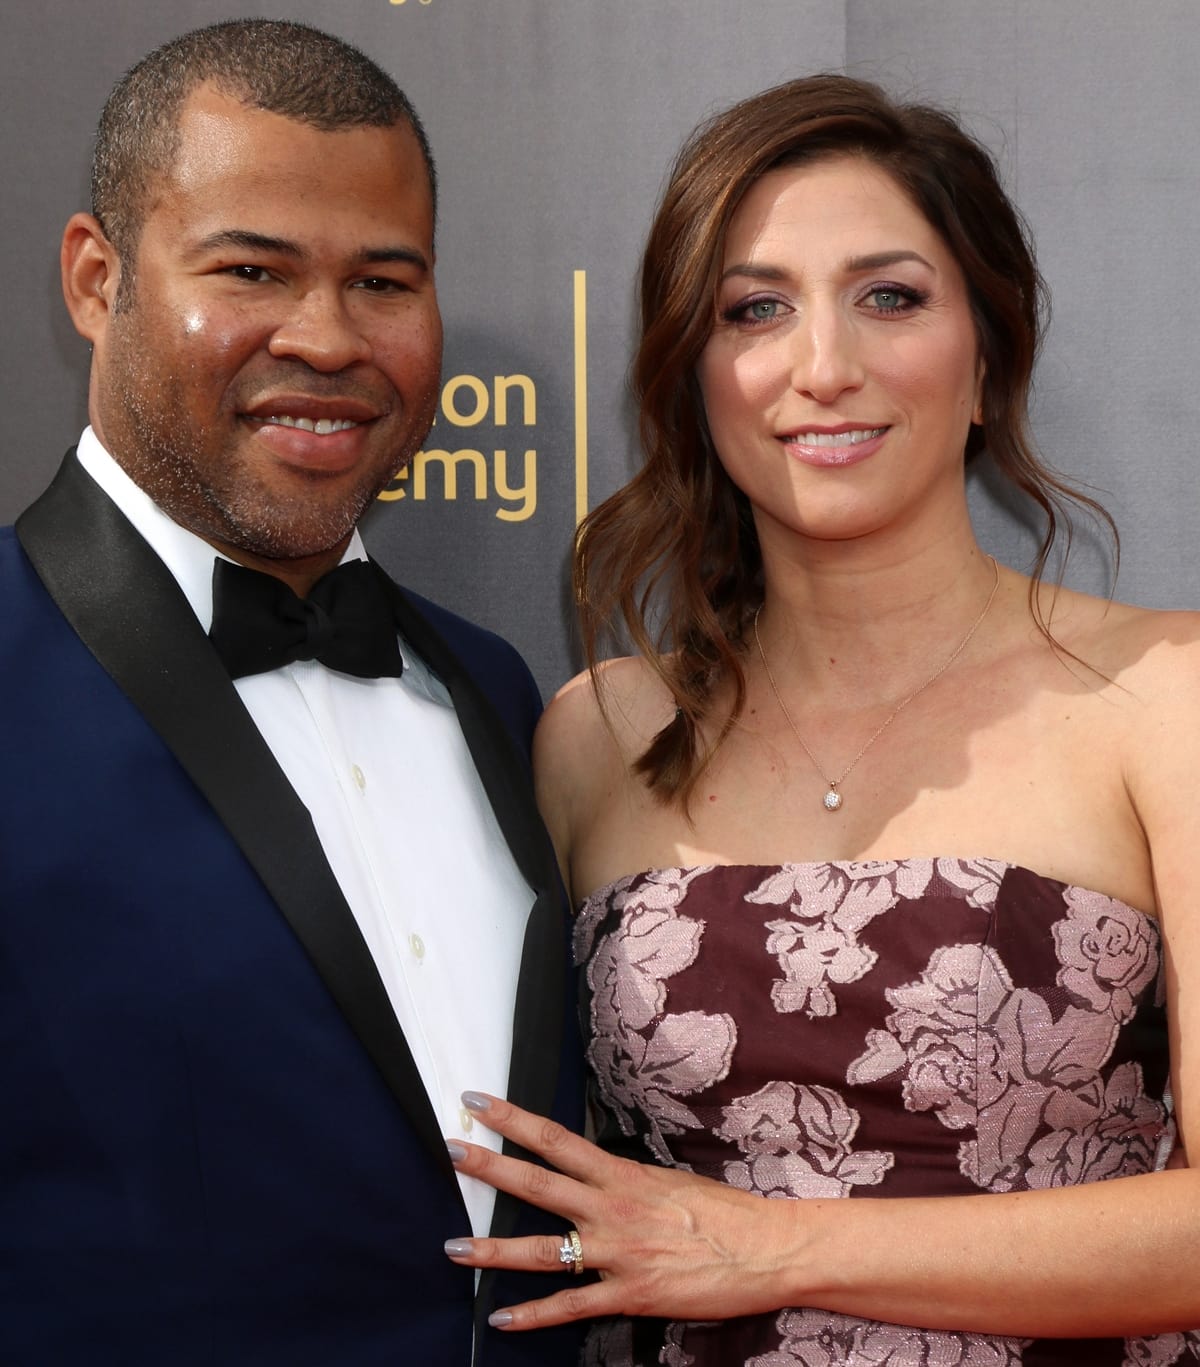 Jordan Peele and Chelsea Peretti married in Big Sur and only brought their dog